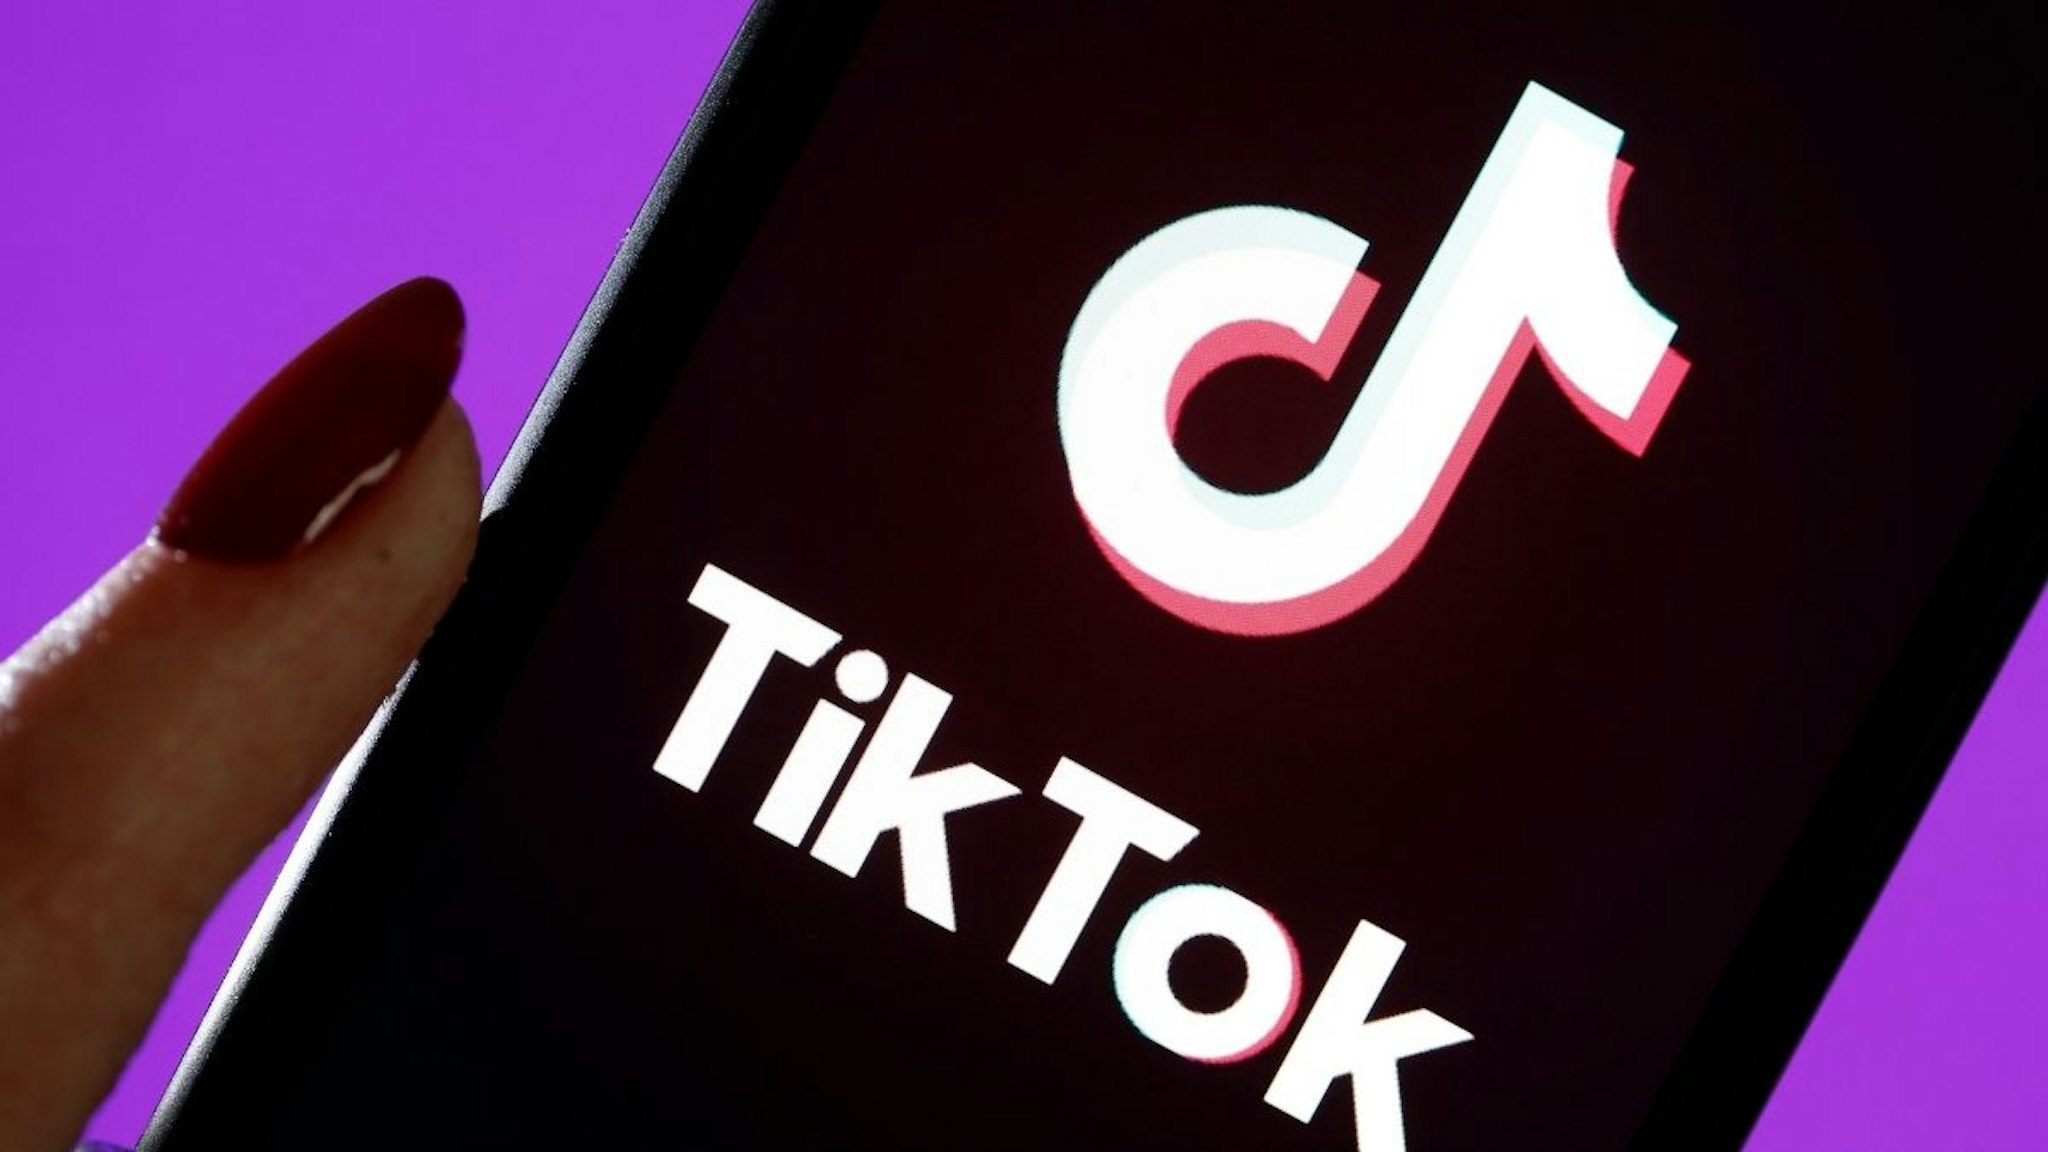 In this photo illustration, the social media application logo, Tik Tok is displayed on the screen of an iPhone on March 05, 2019 in Paris, France.